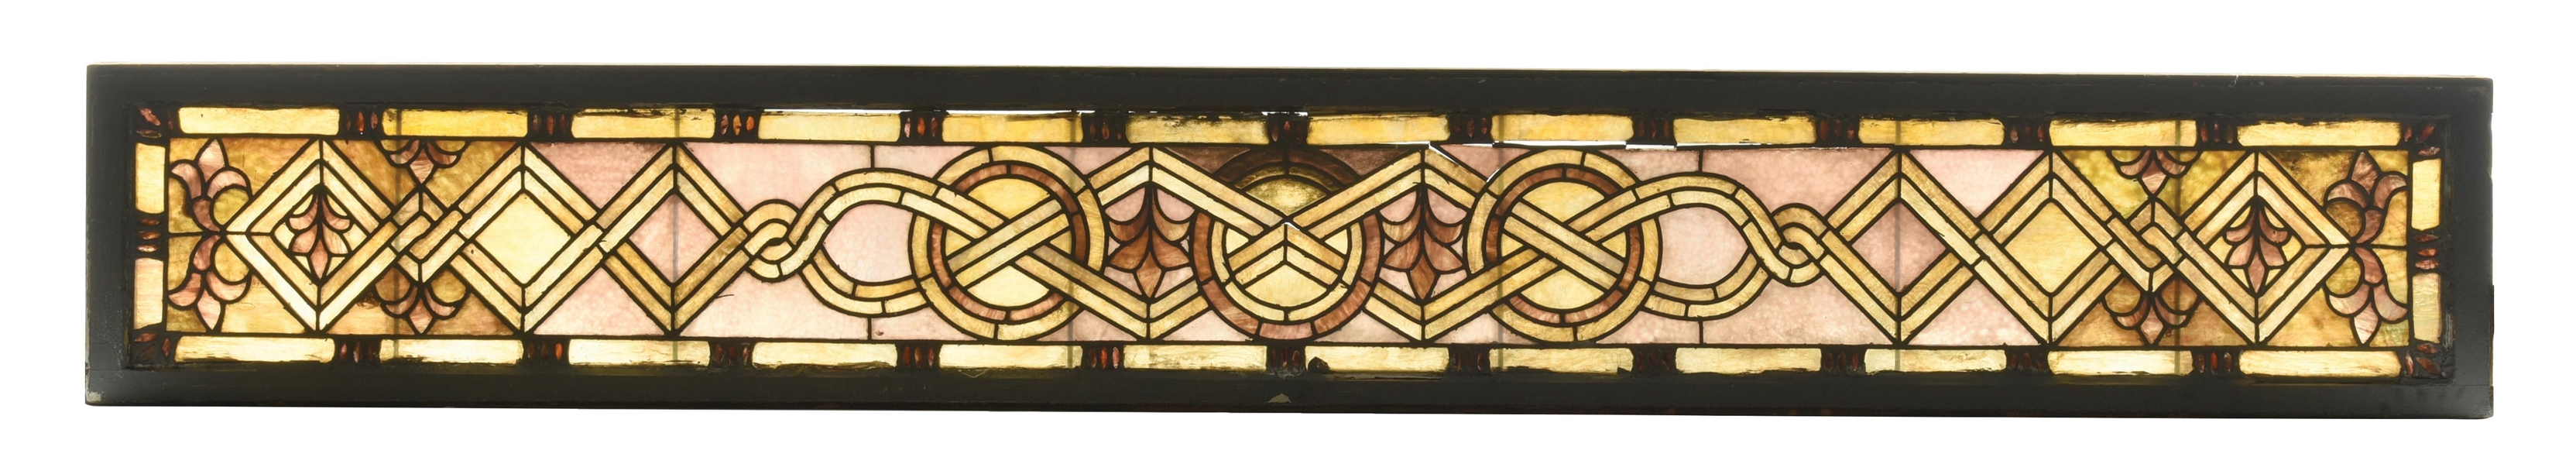 ANTIQUE STAINED GLASS LONG WINDOW PANEL